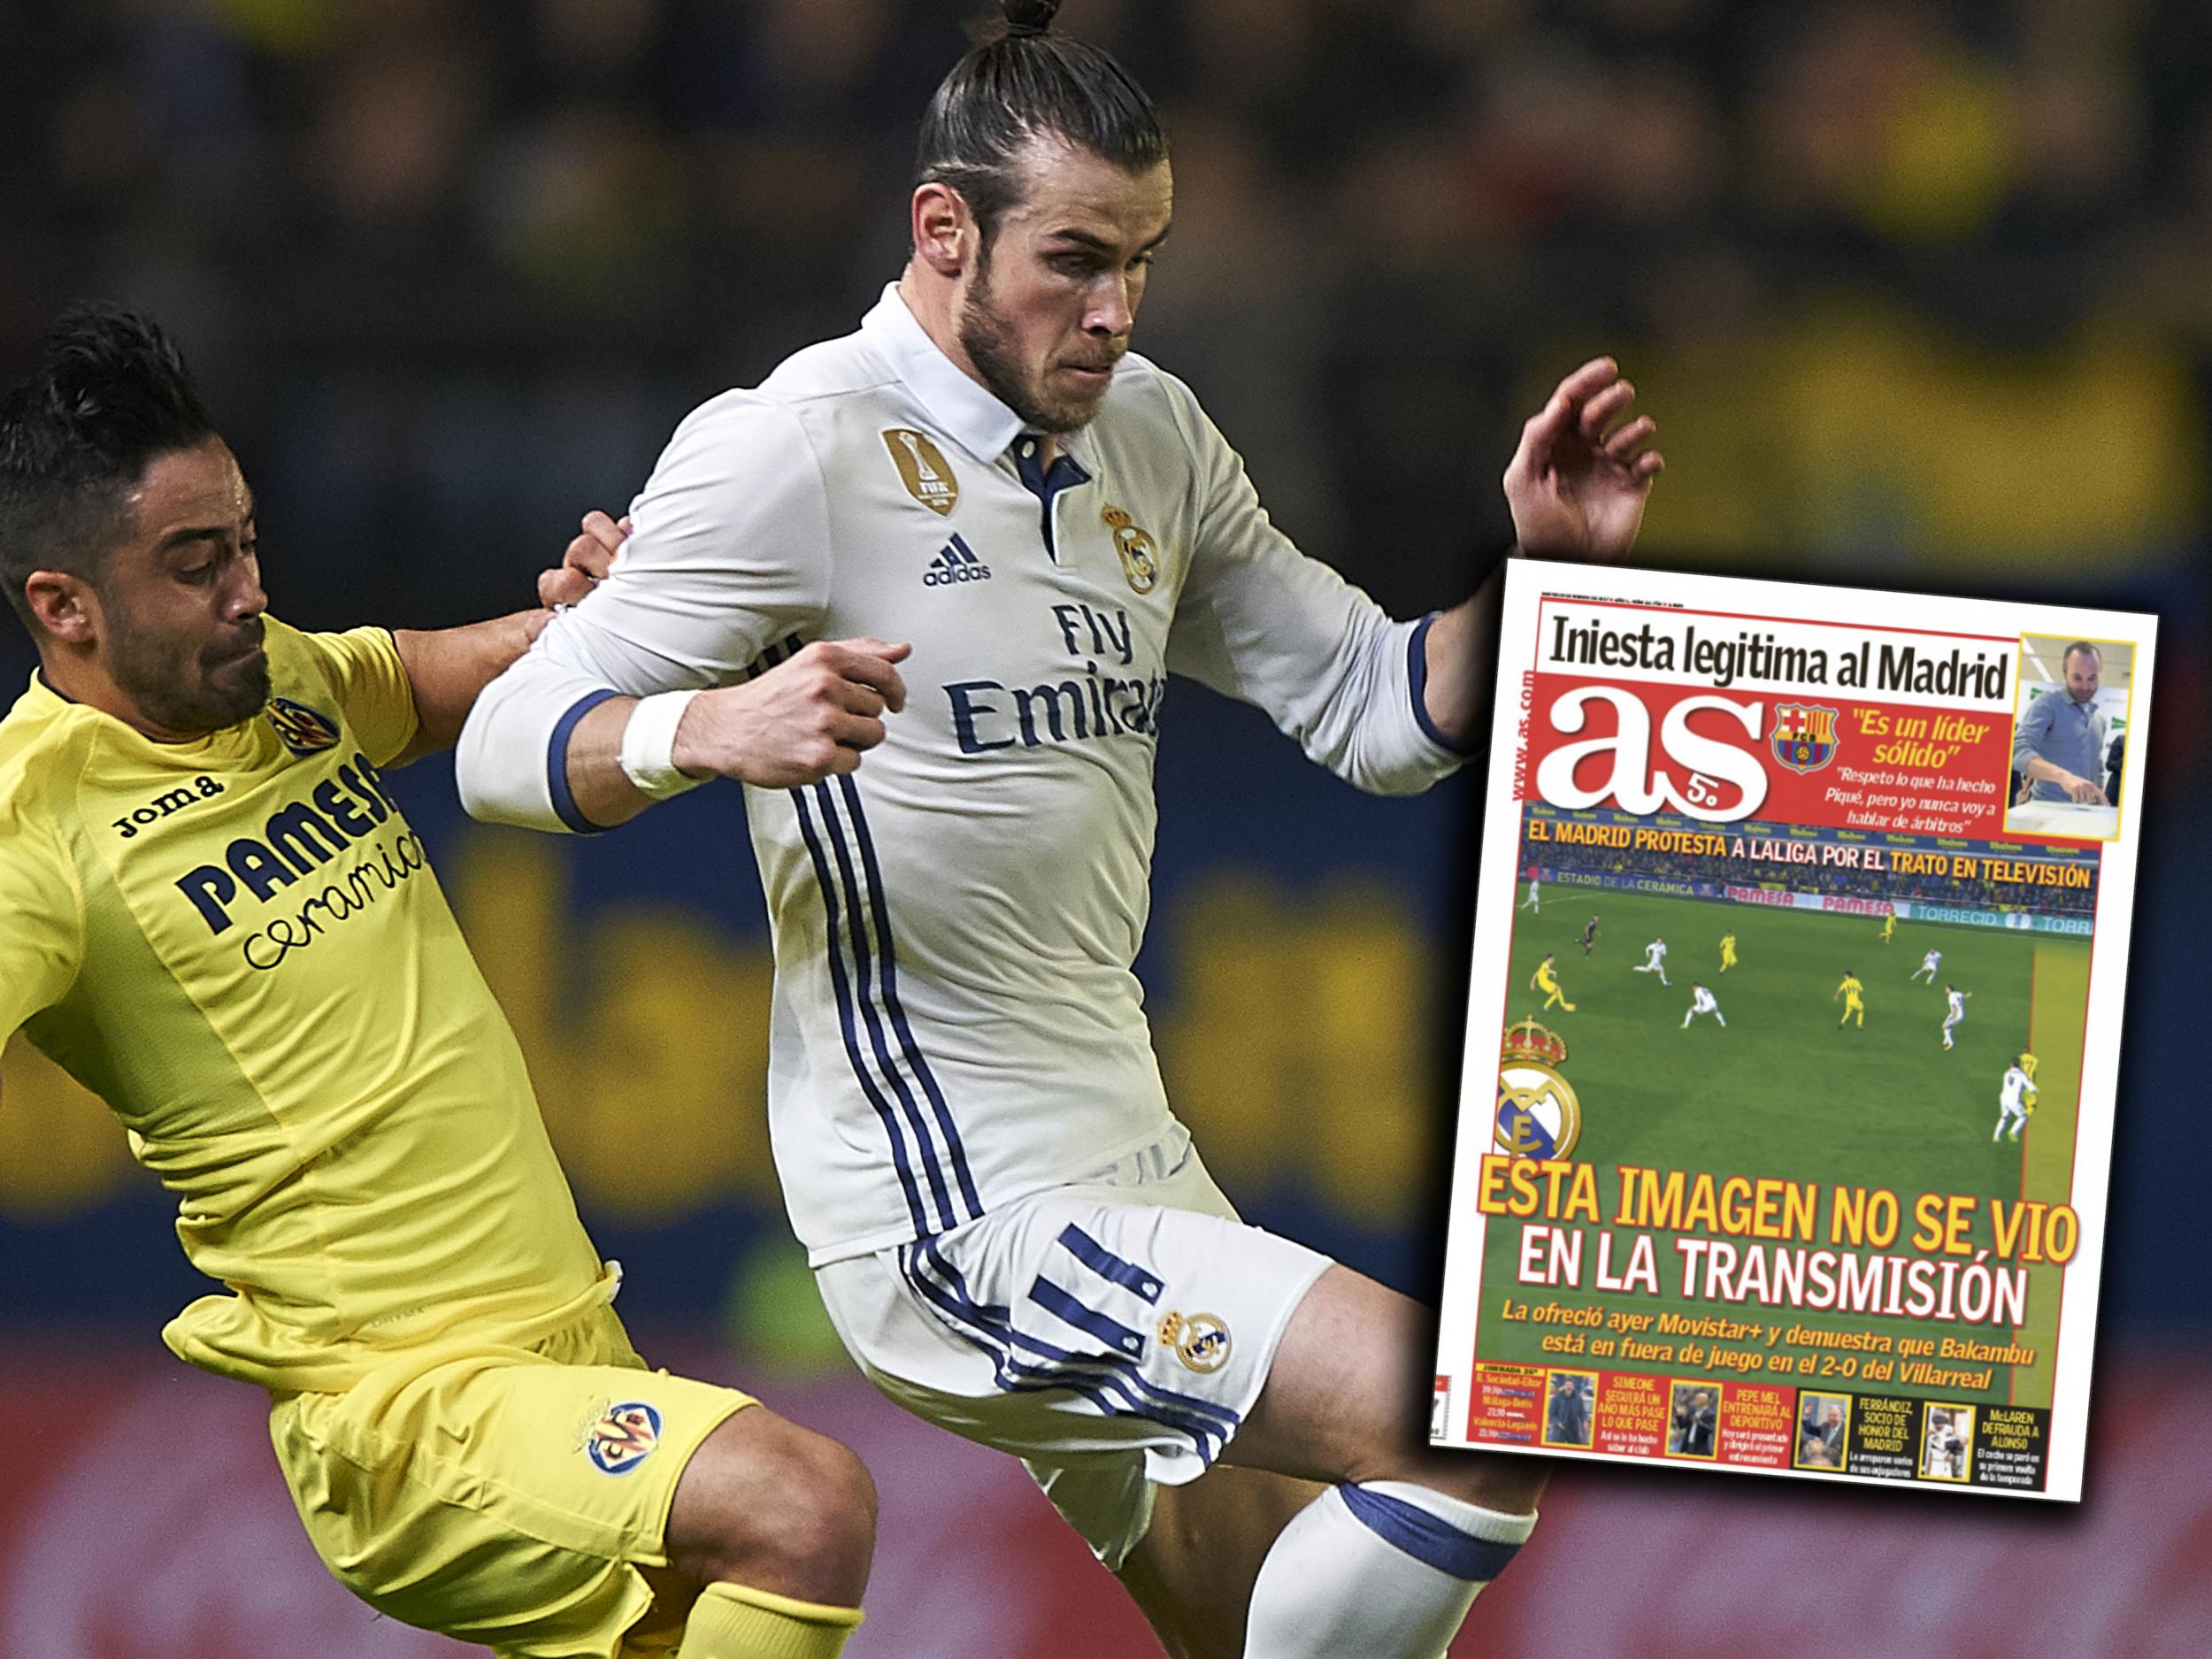 The Spanish press have intensified the row between the two clubs